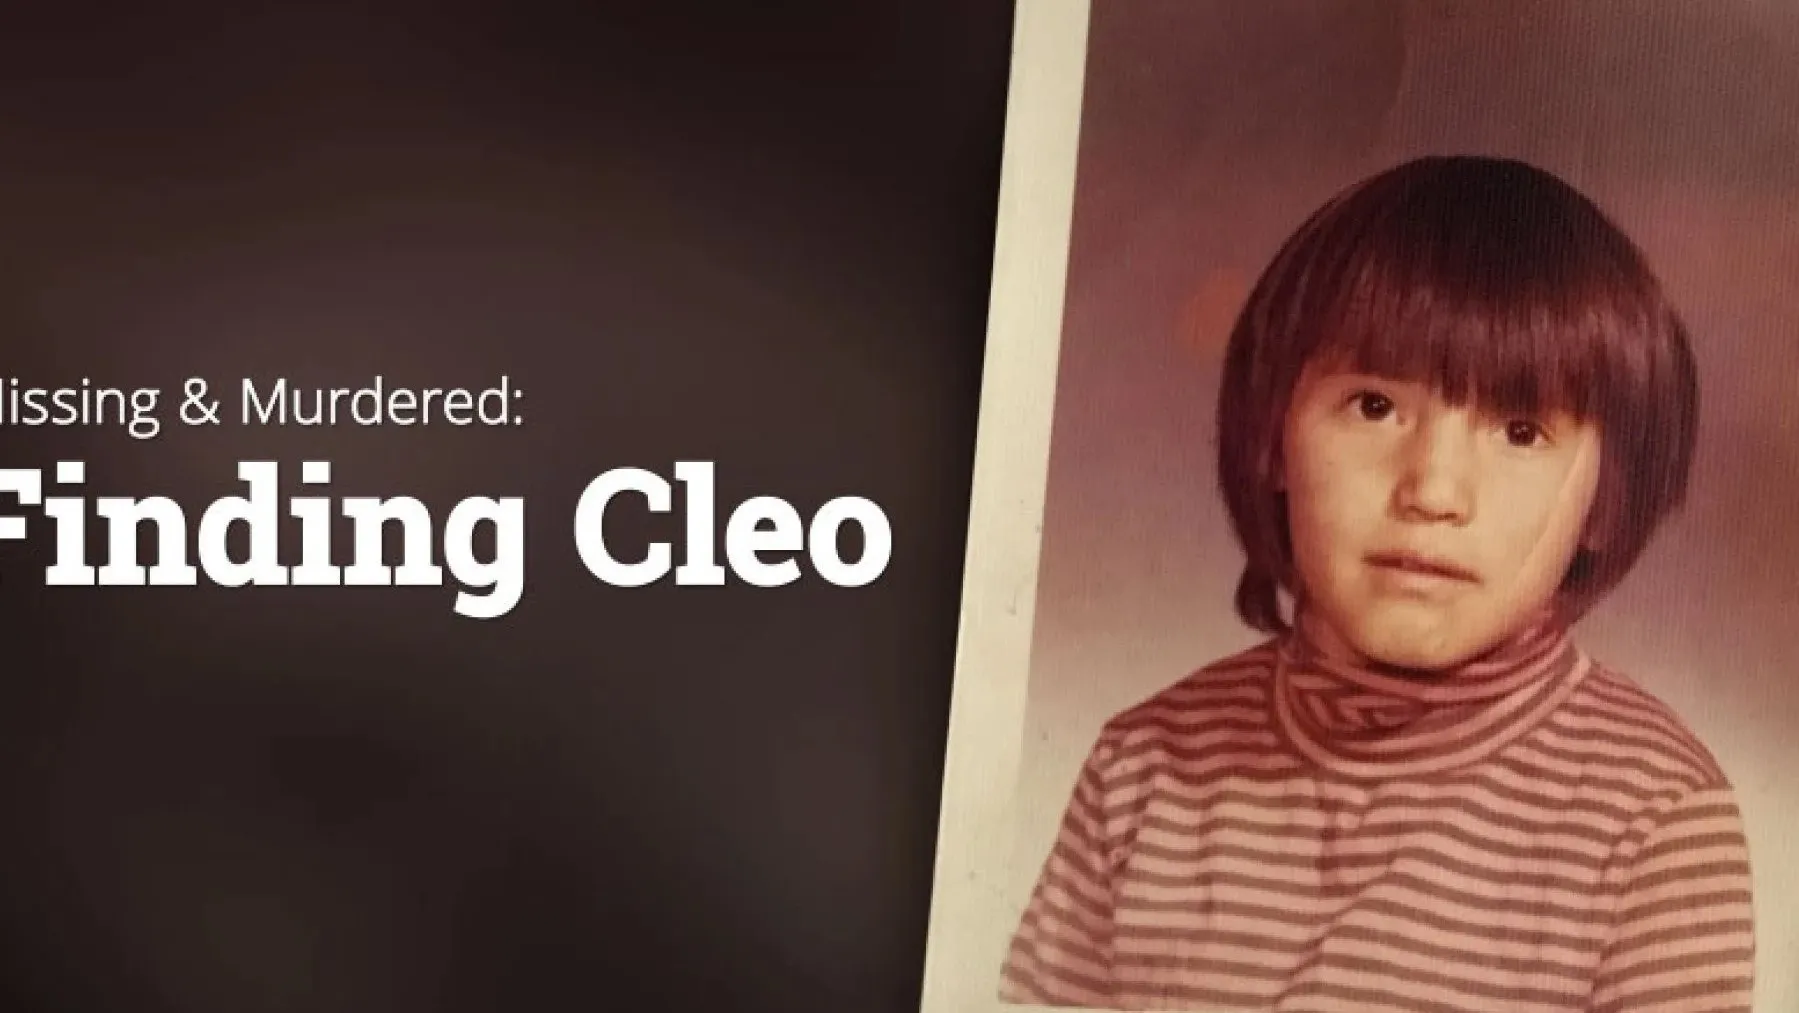 A young child is shown next to the words "Missing & Murdered: Finding Cleo".